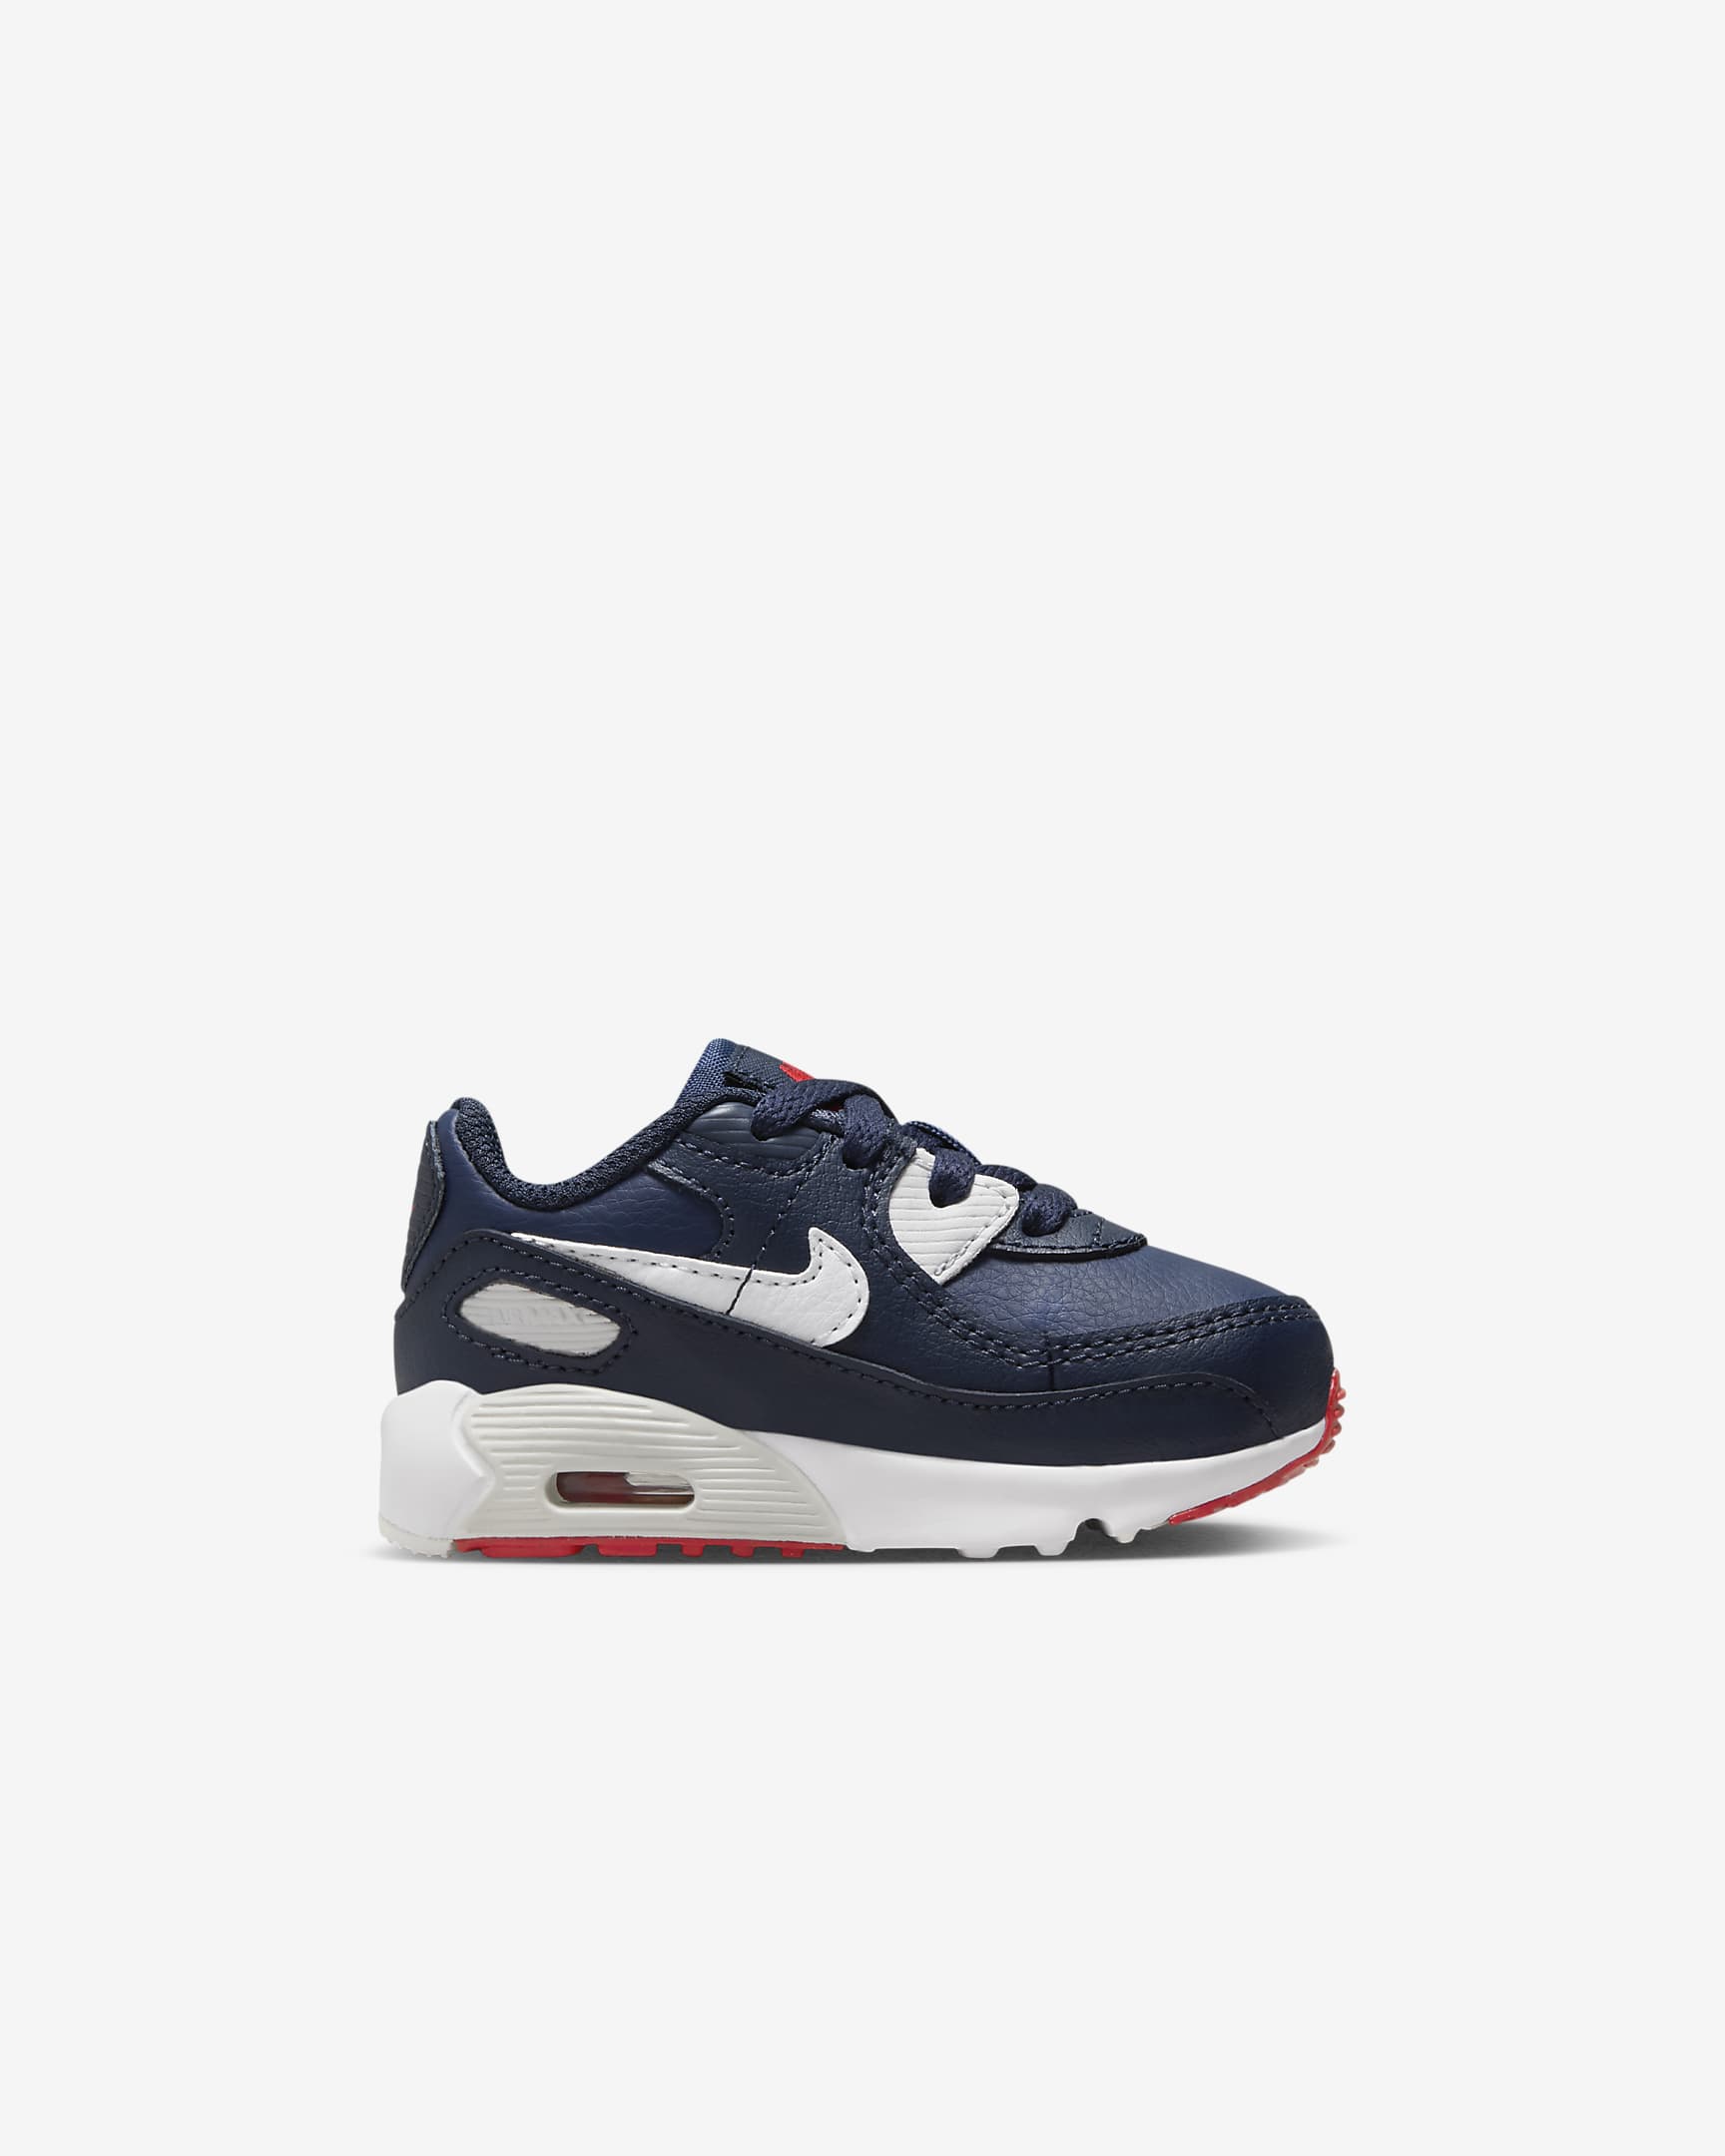 Nike Air Max 90 LTR Baby/Toddler Shoes - Obsidian/Midnight Navy/Track Red/White